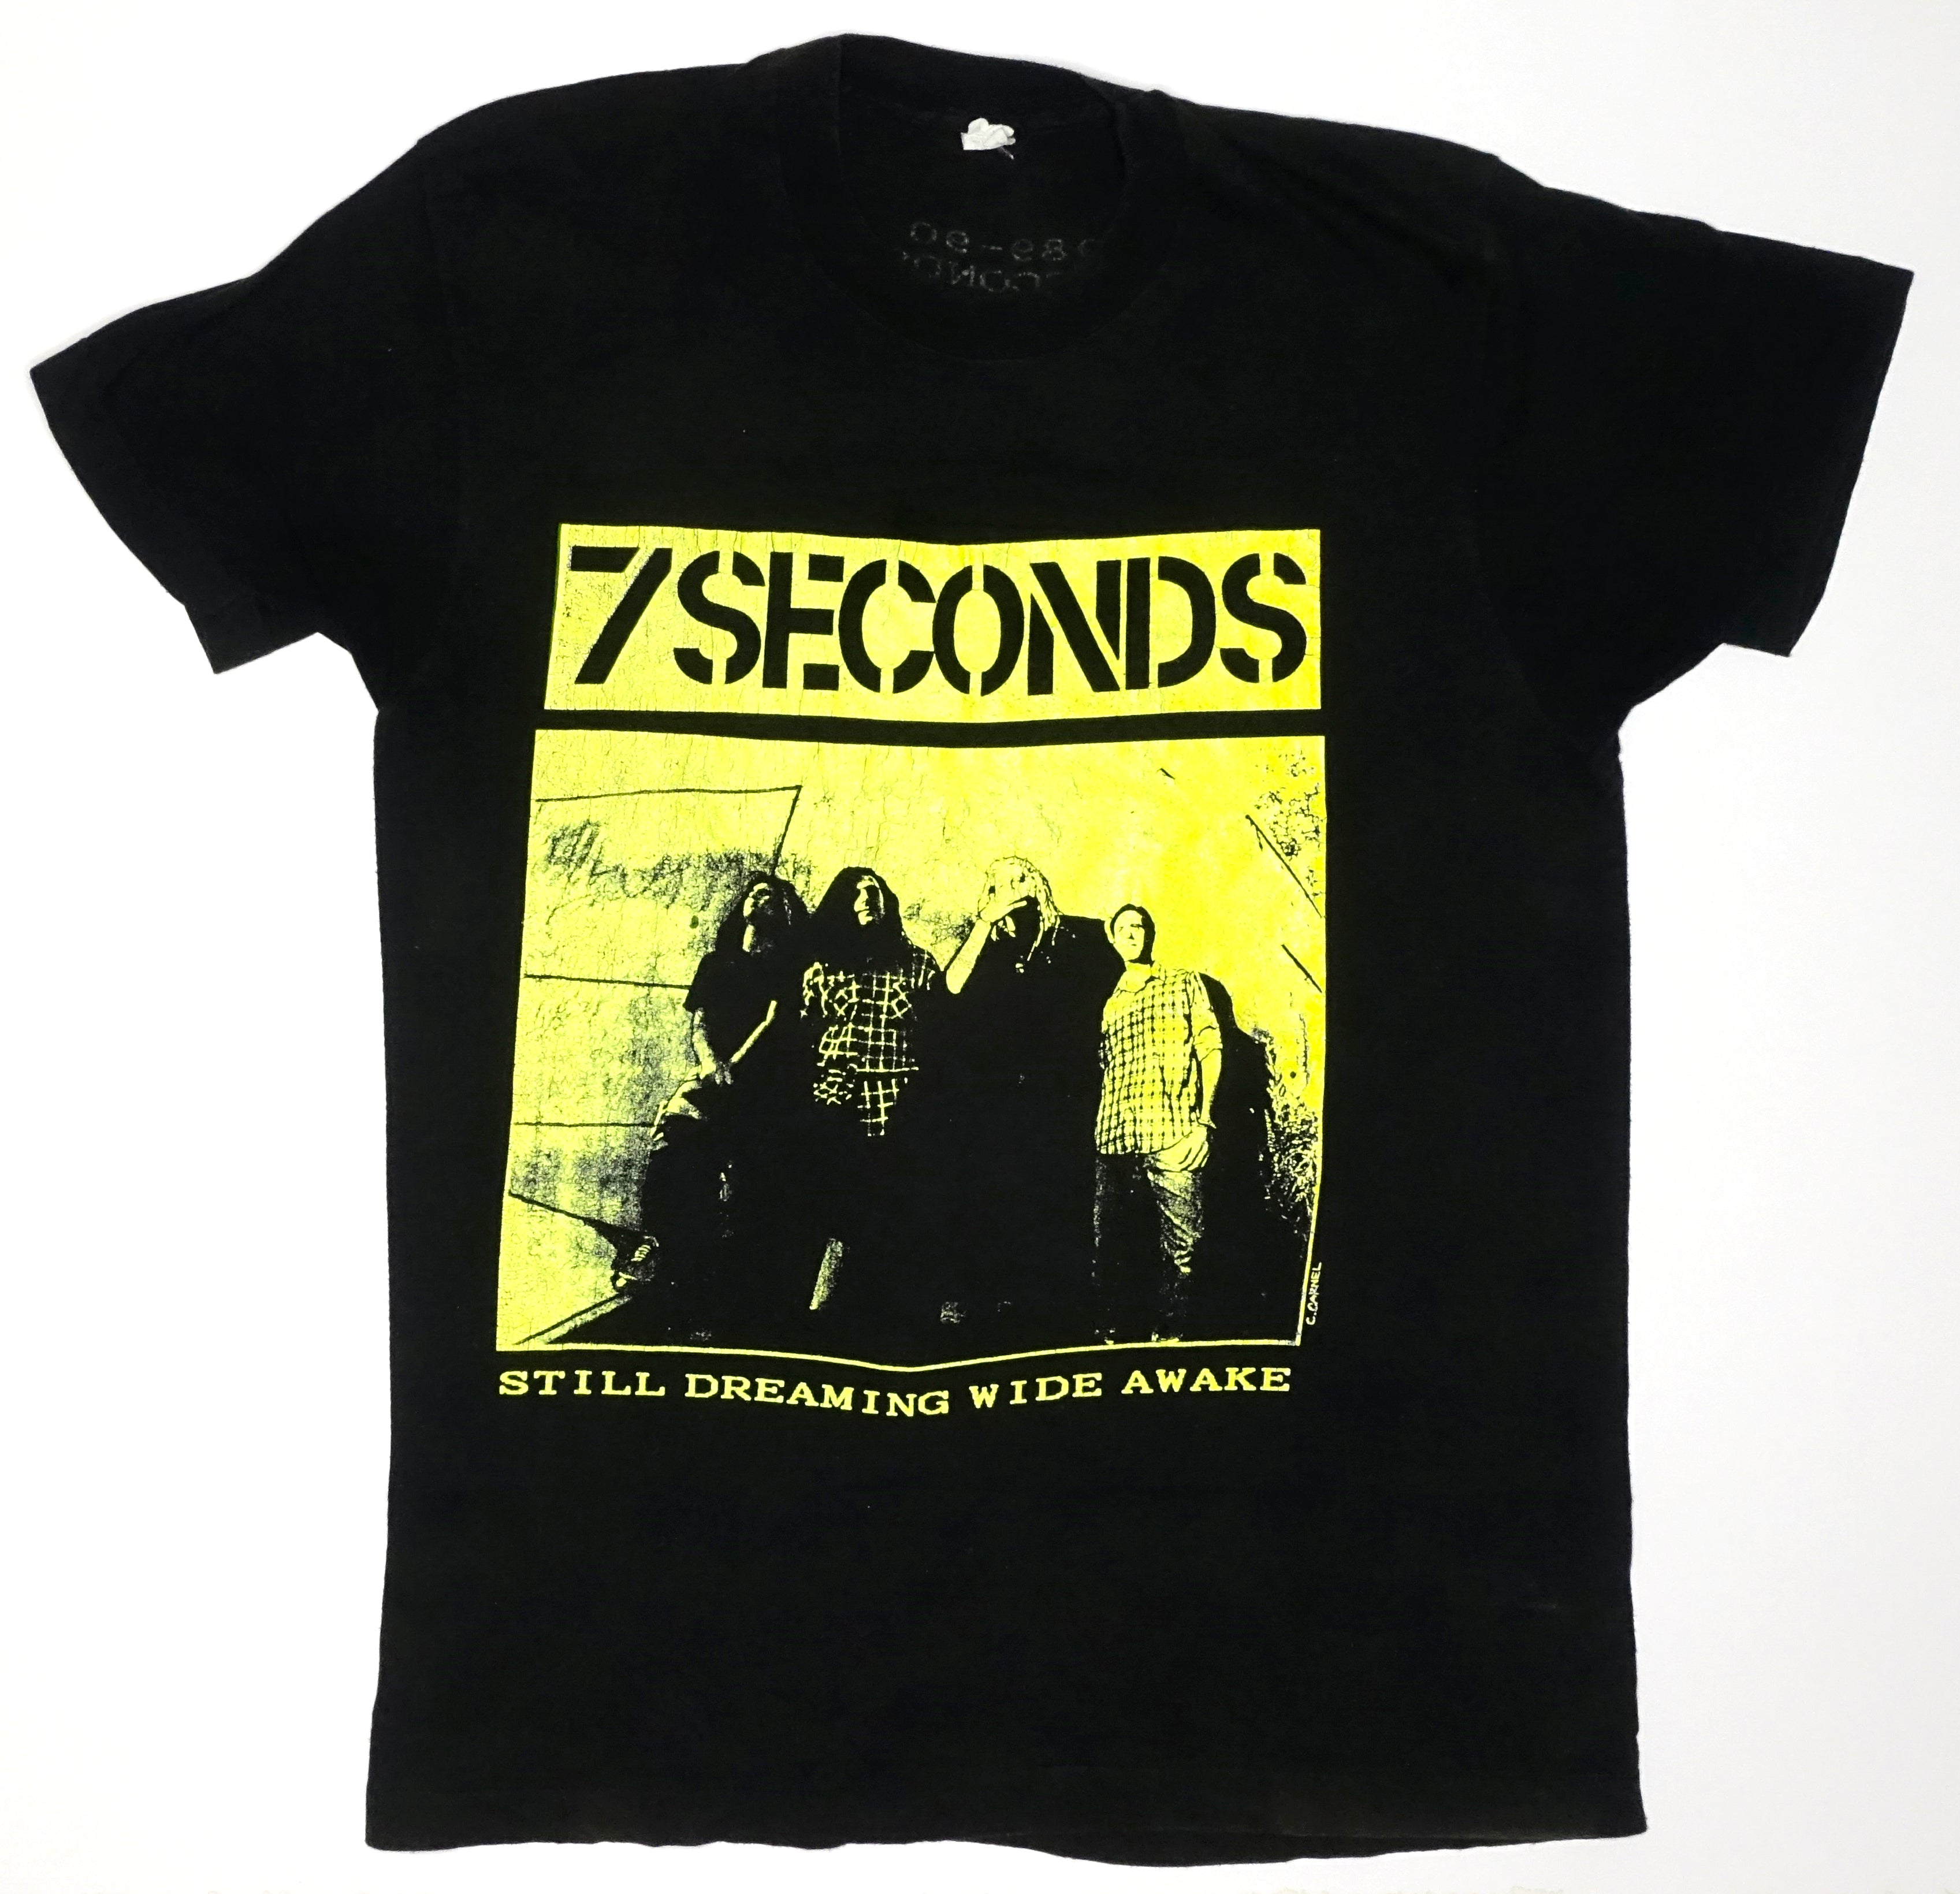 7 Seconds – Still Dreaming Wide Awake Soulforce 1989-90 US Tour Shirt Size Large